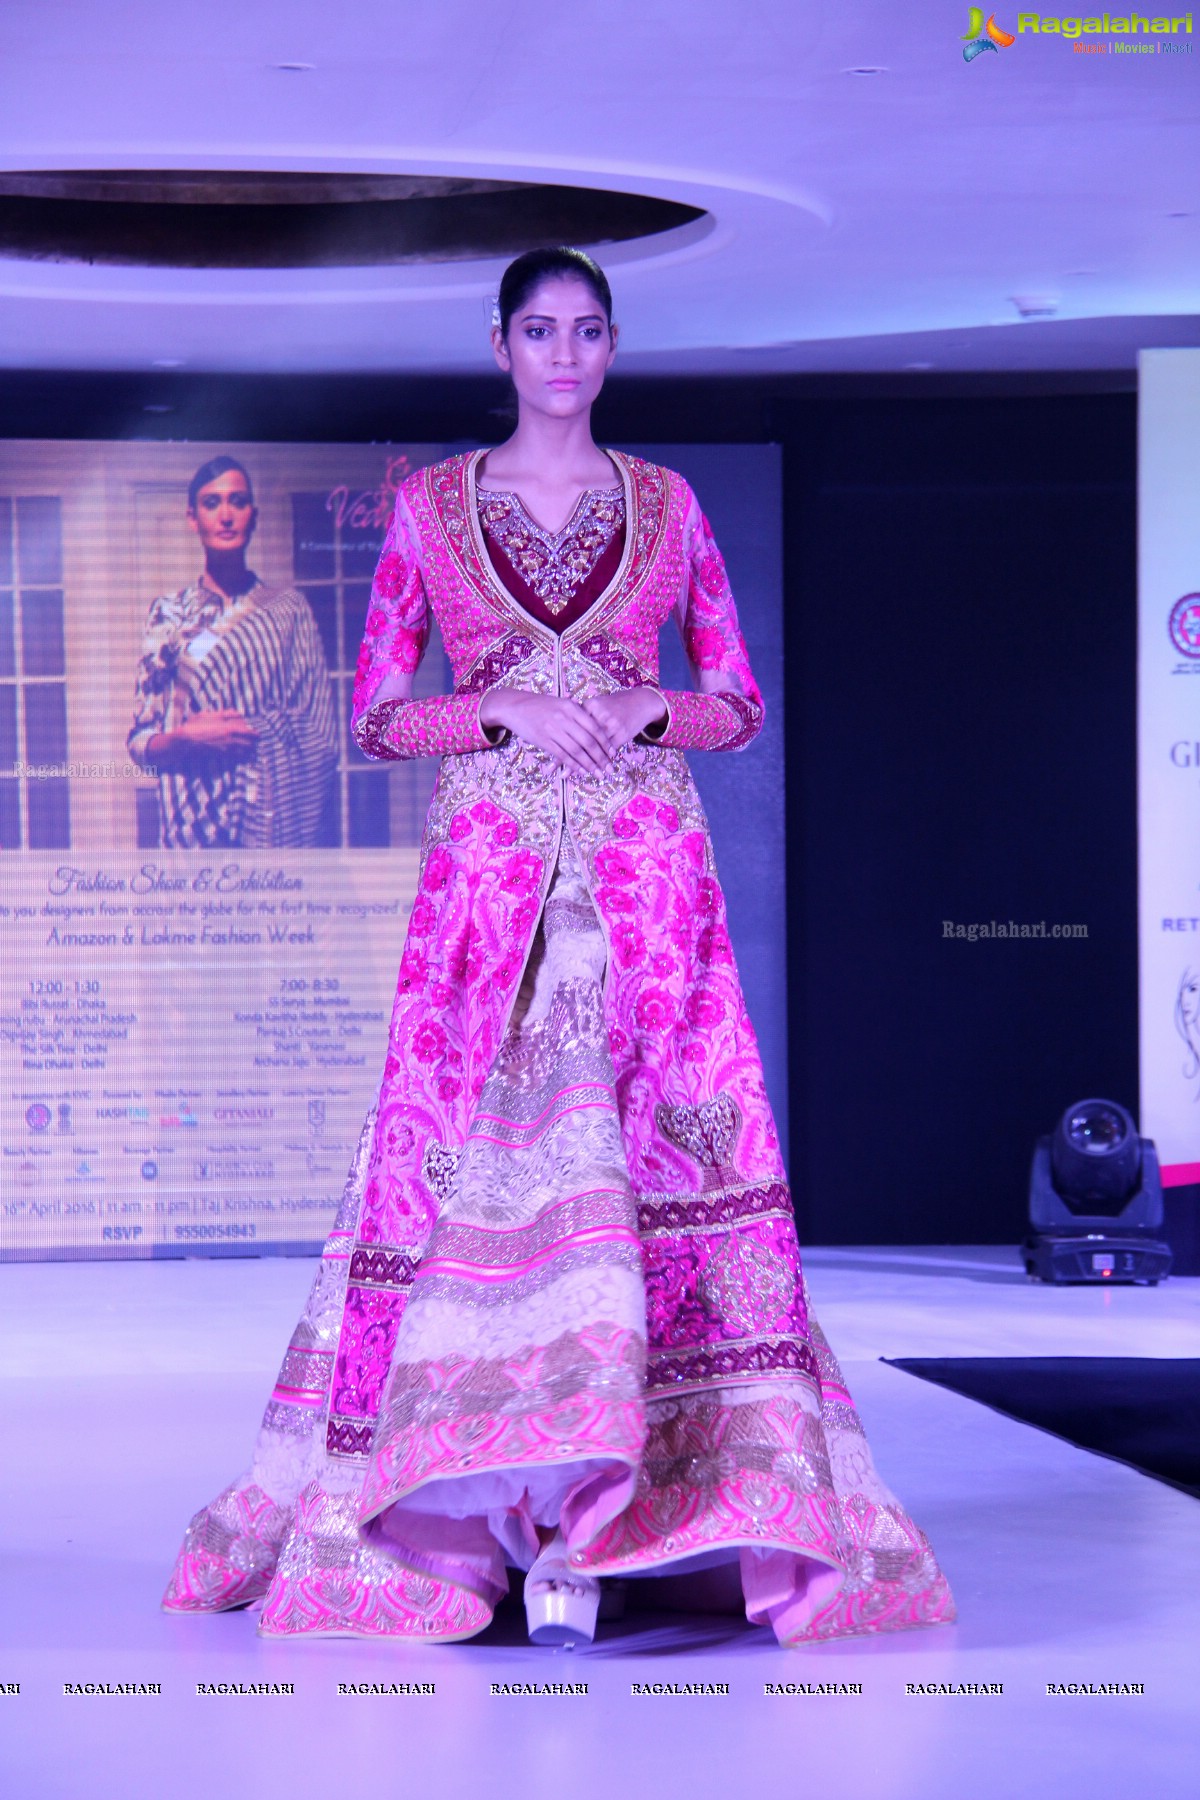 Vedha Fashion Show and Exhibition (Evening Session), Hyderabad